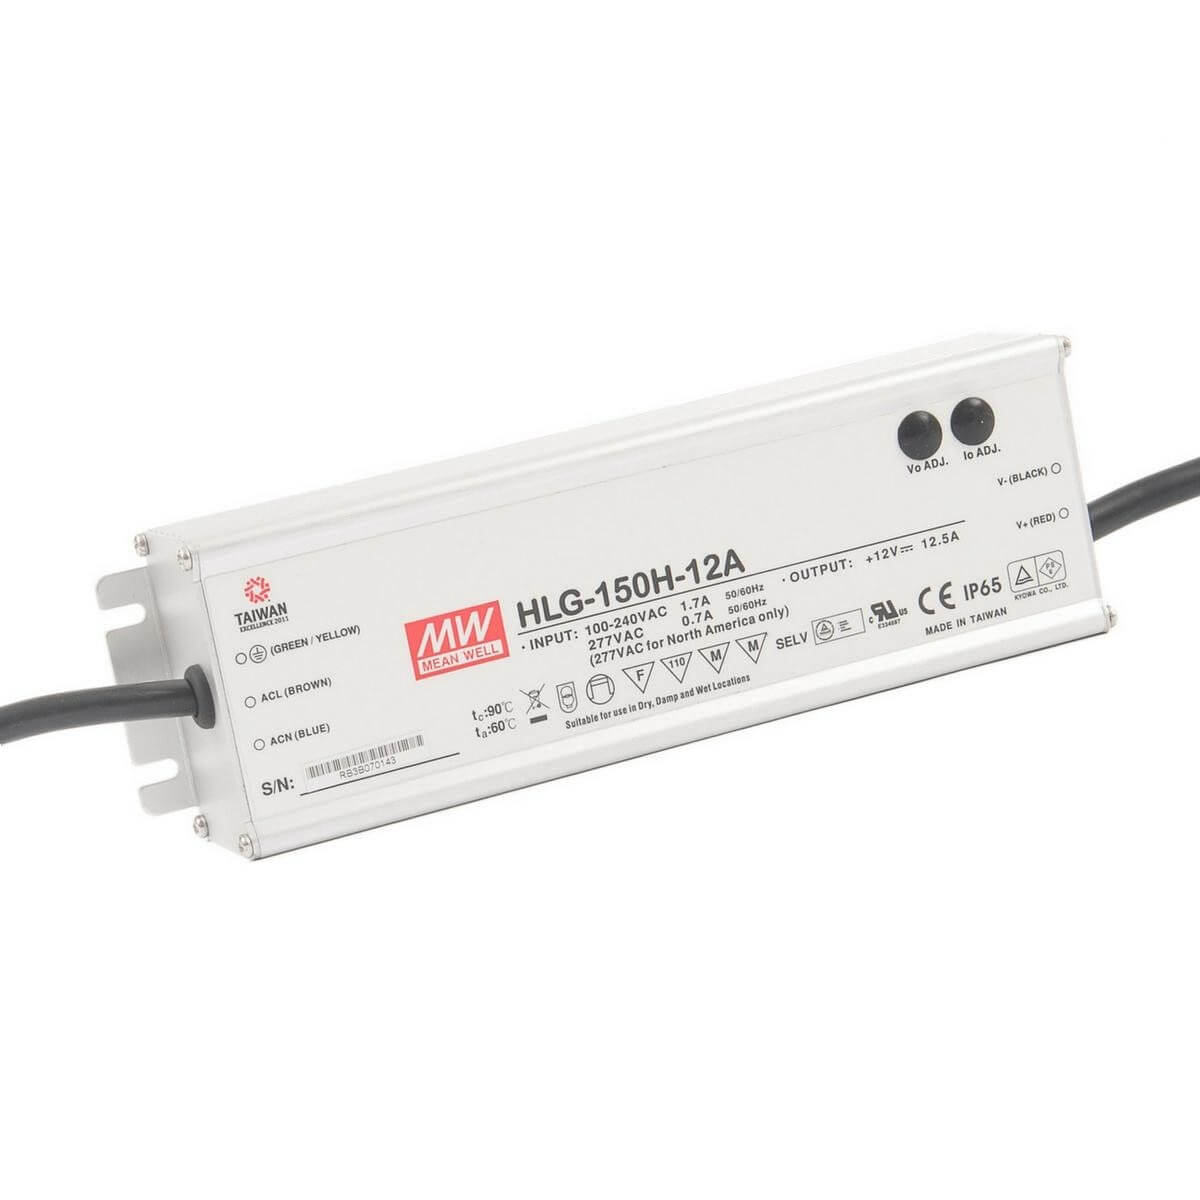 View 150w Meanwell LED Driver information